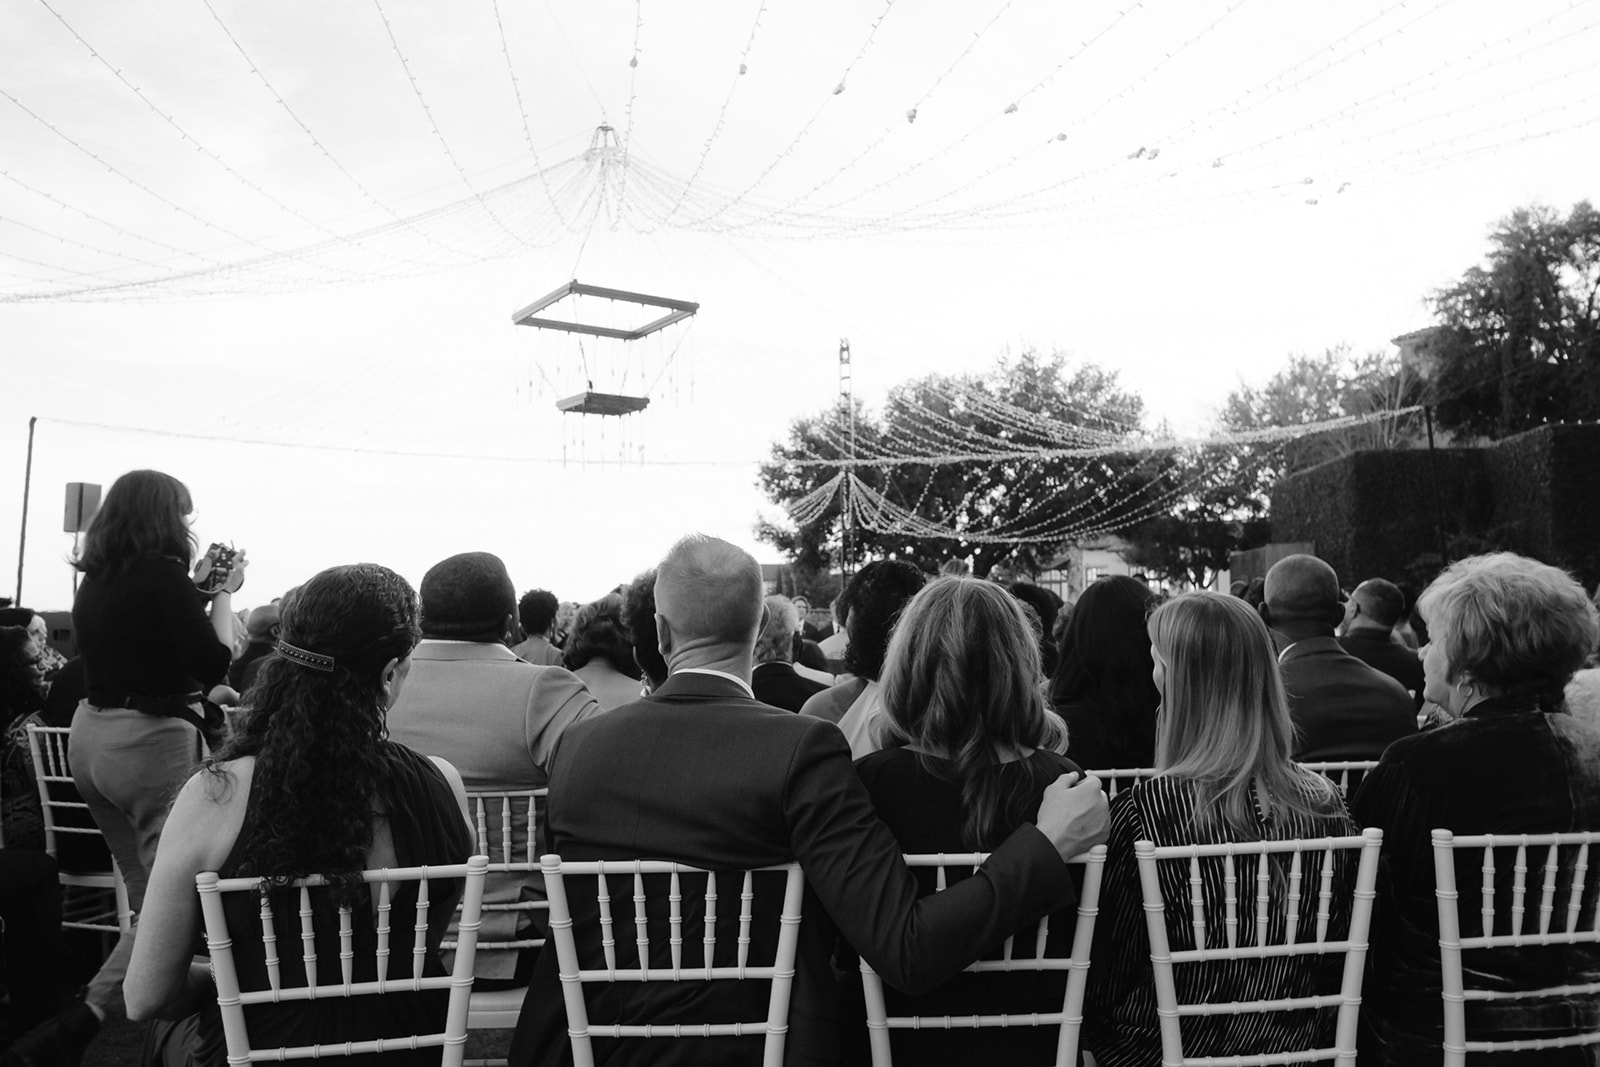 Black and white portrait of wedding guests watching the ceremony under a canopy of fairy lights.